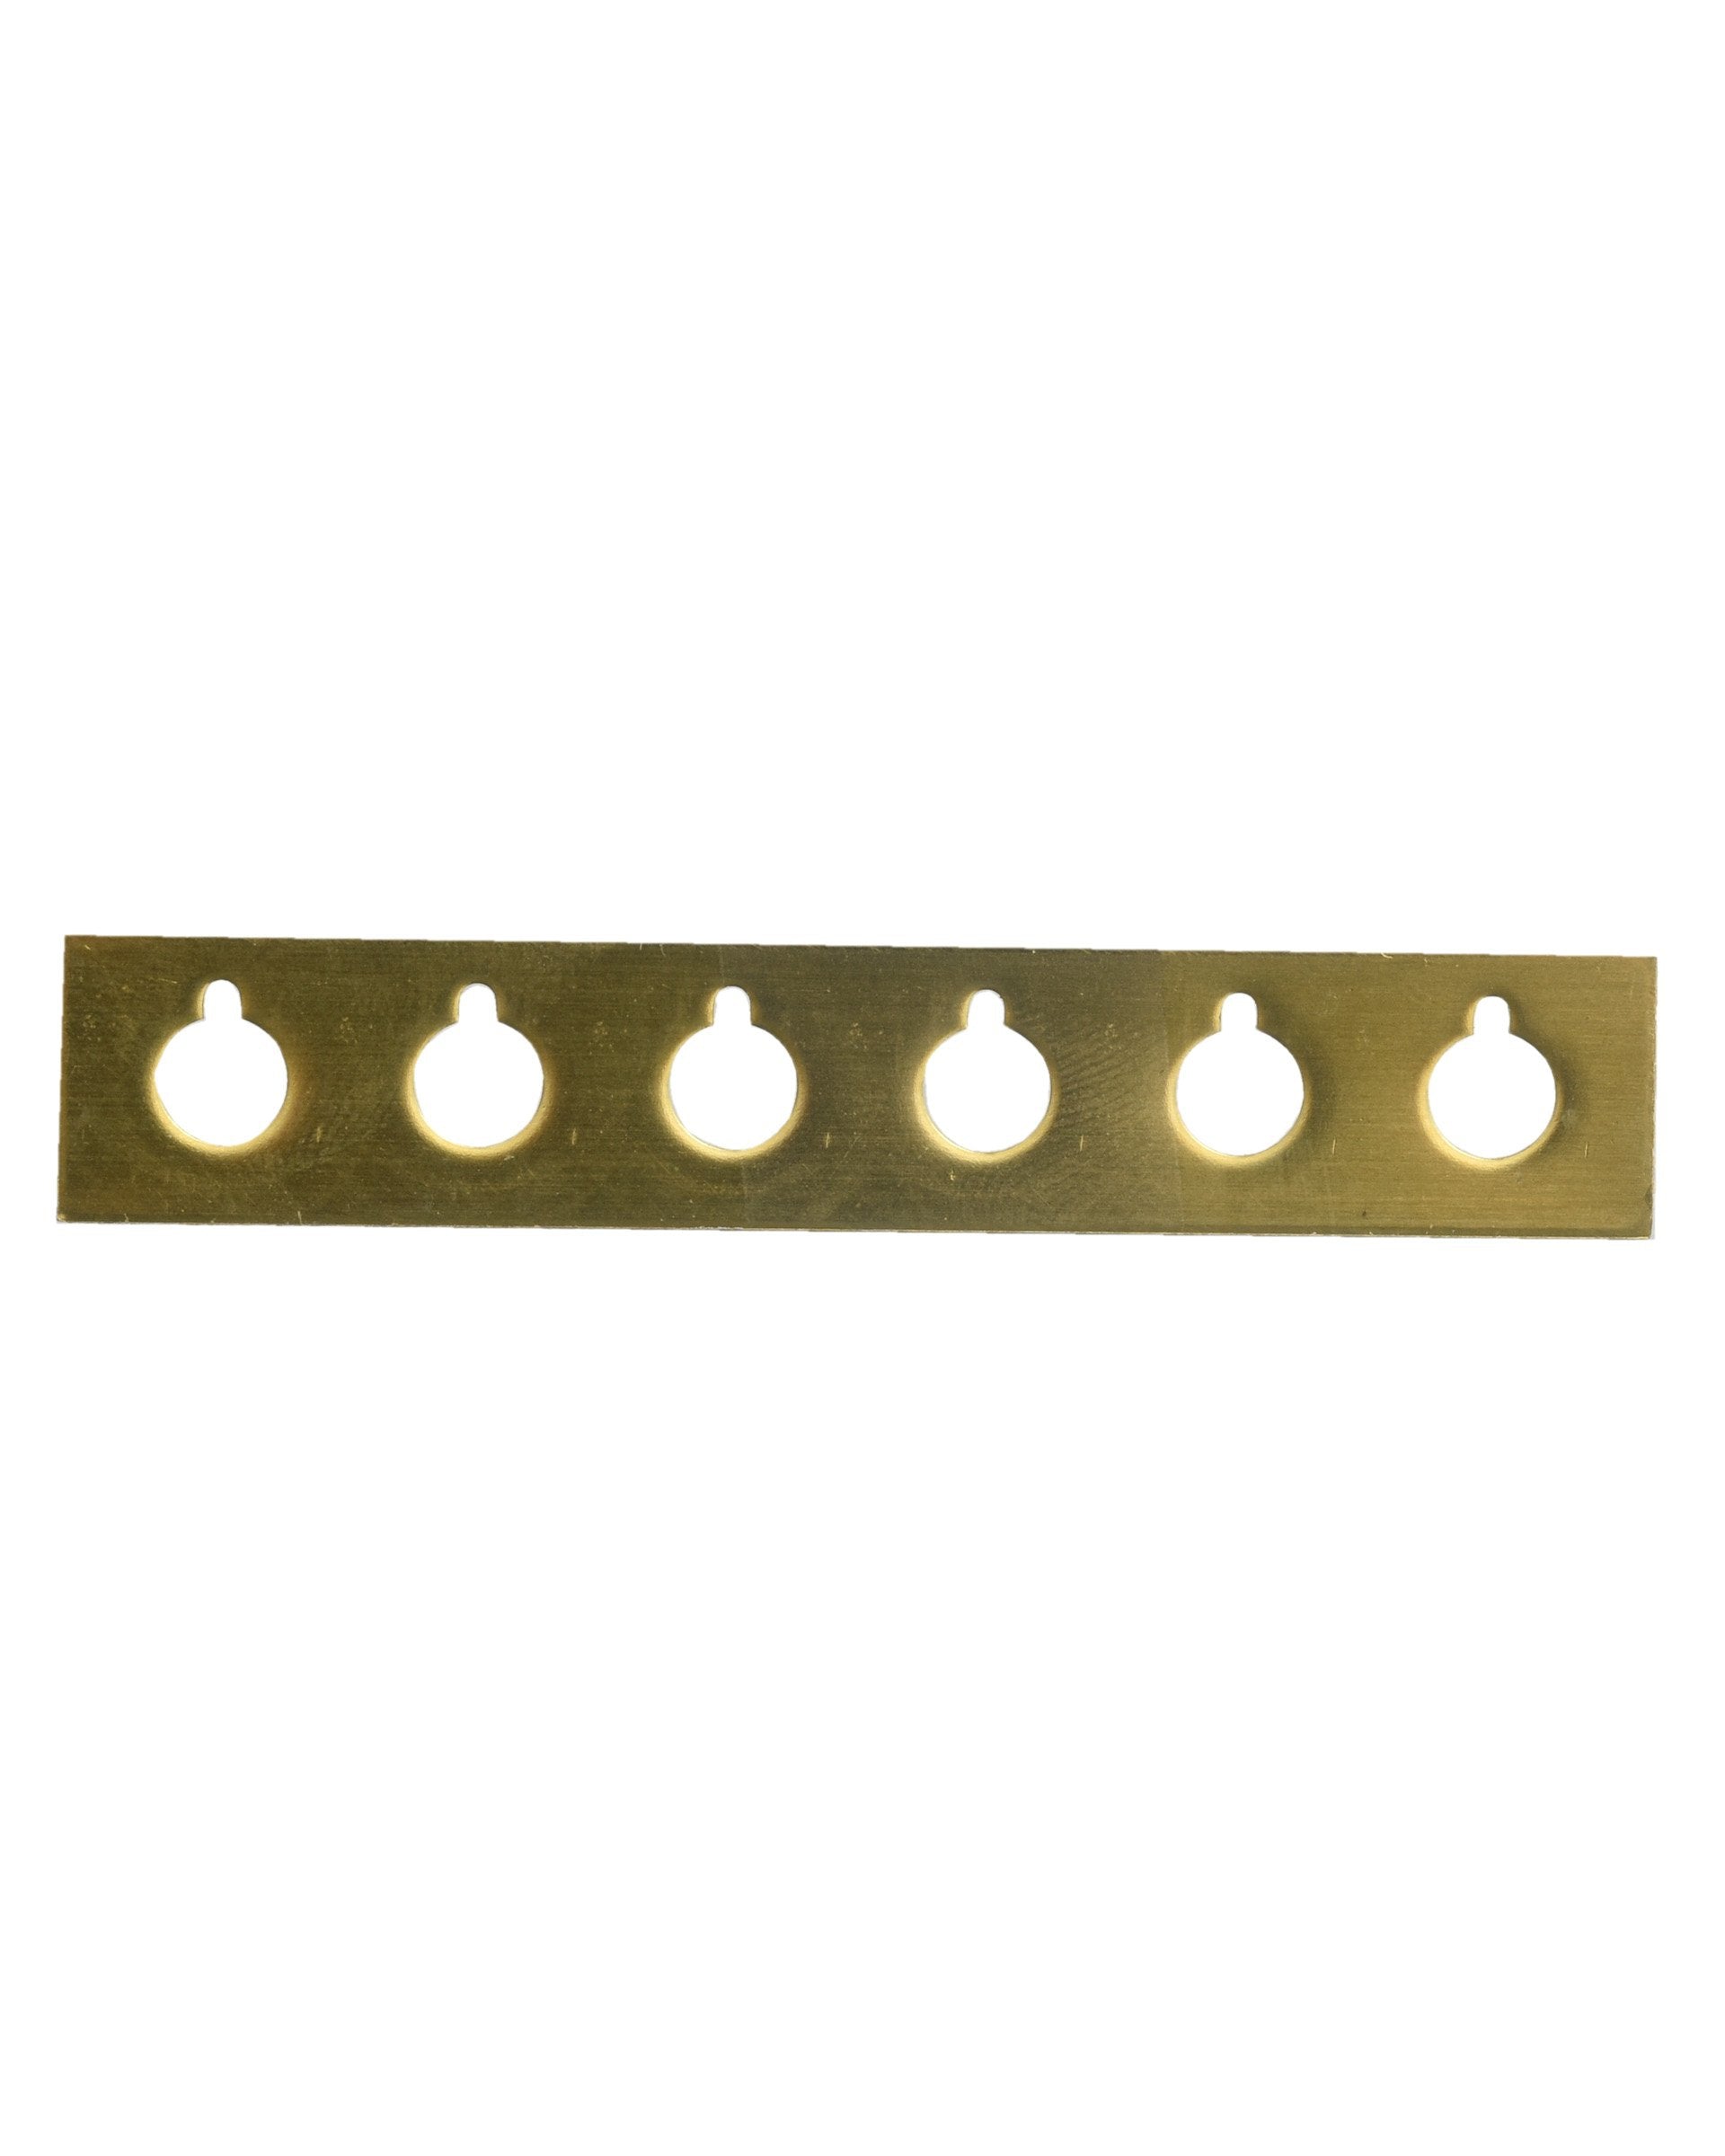 Image 1 of Mitchel's Acoustic Guitar "Plate Mate" 2 3/16" Spacing - SKU# PM100-2-3/16 : Product Type Accessories & Parts : Elderly Instruments